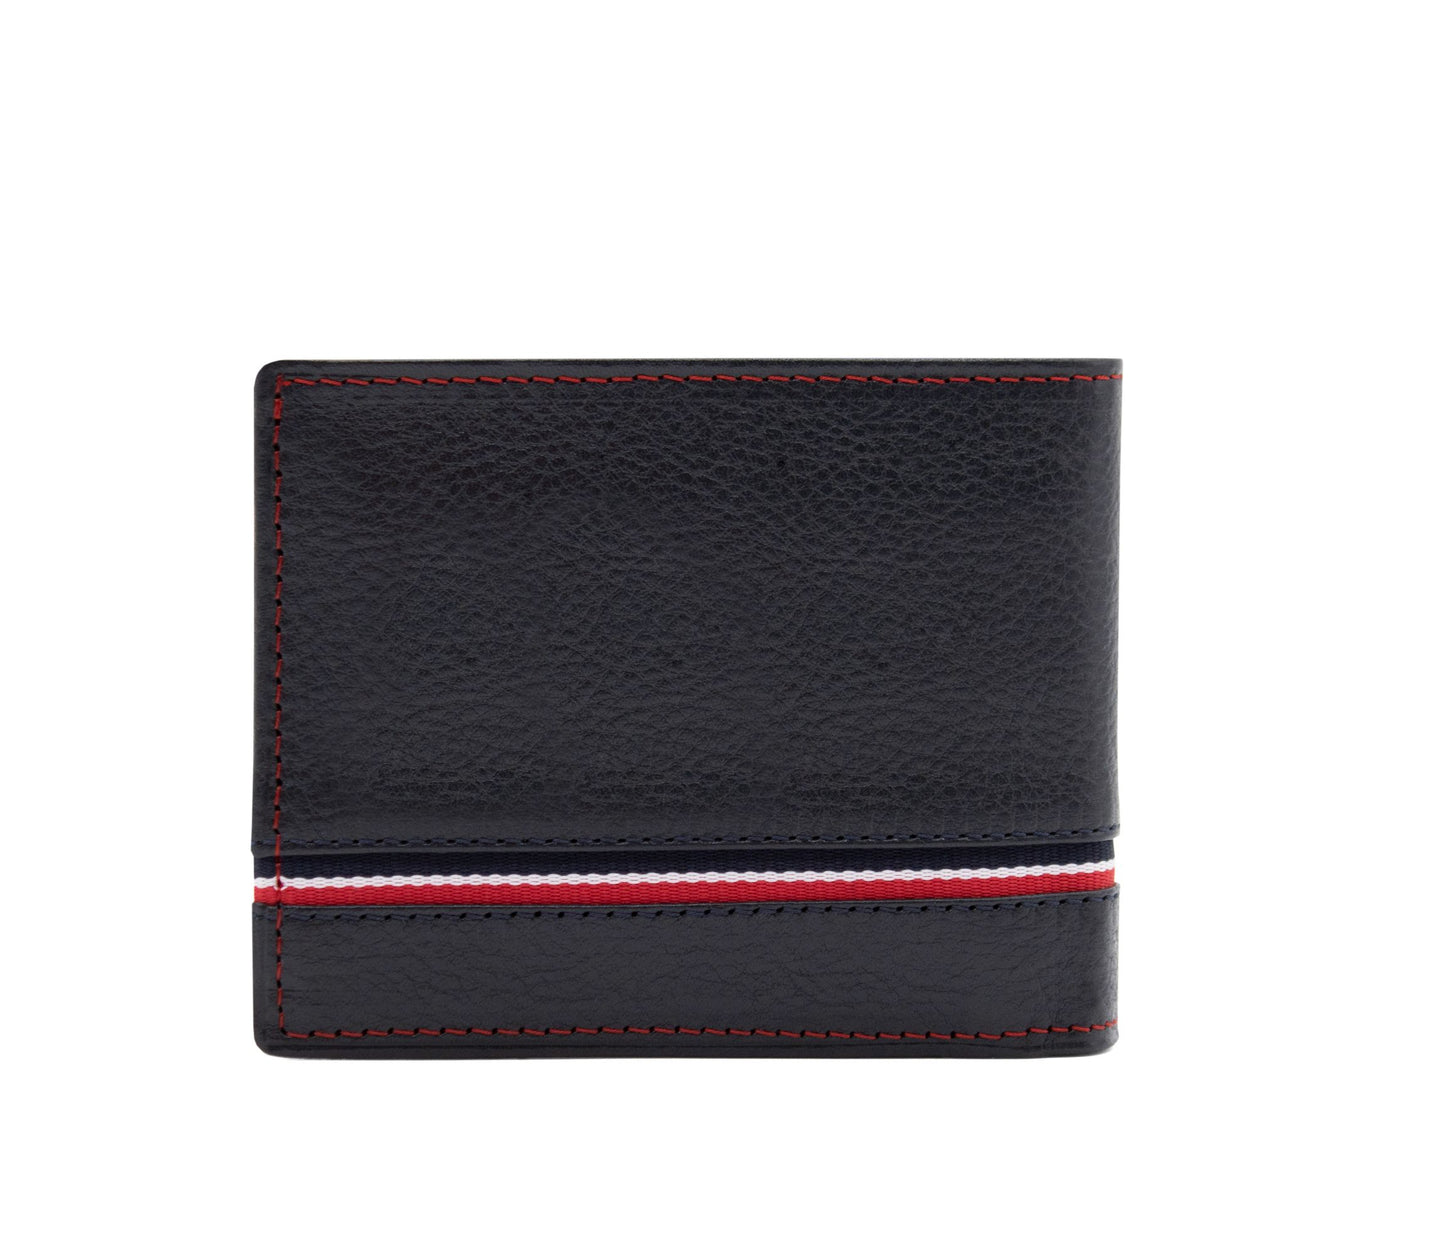 #color_ Navy | Cavalinho The Sailor Trifold Leather Wallet - Navy - 28150517.22_3